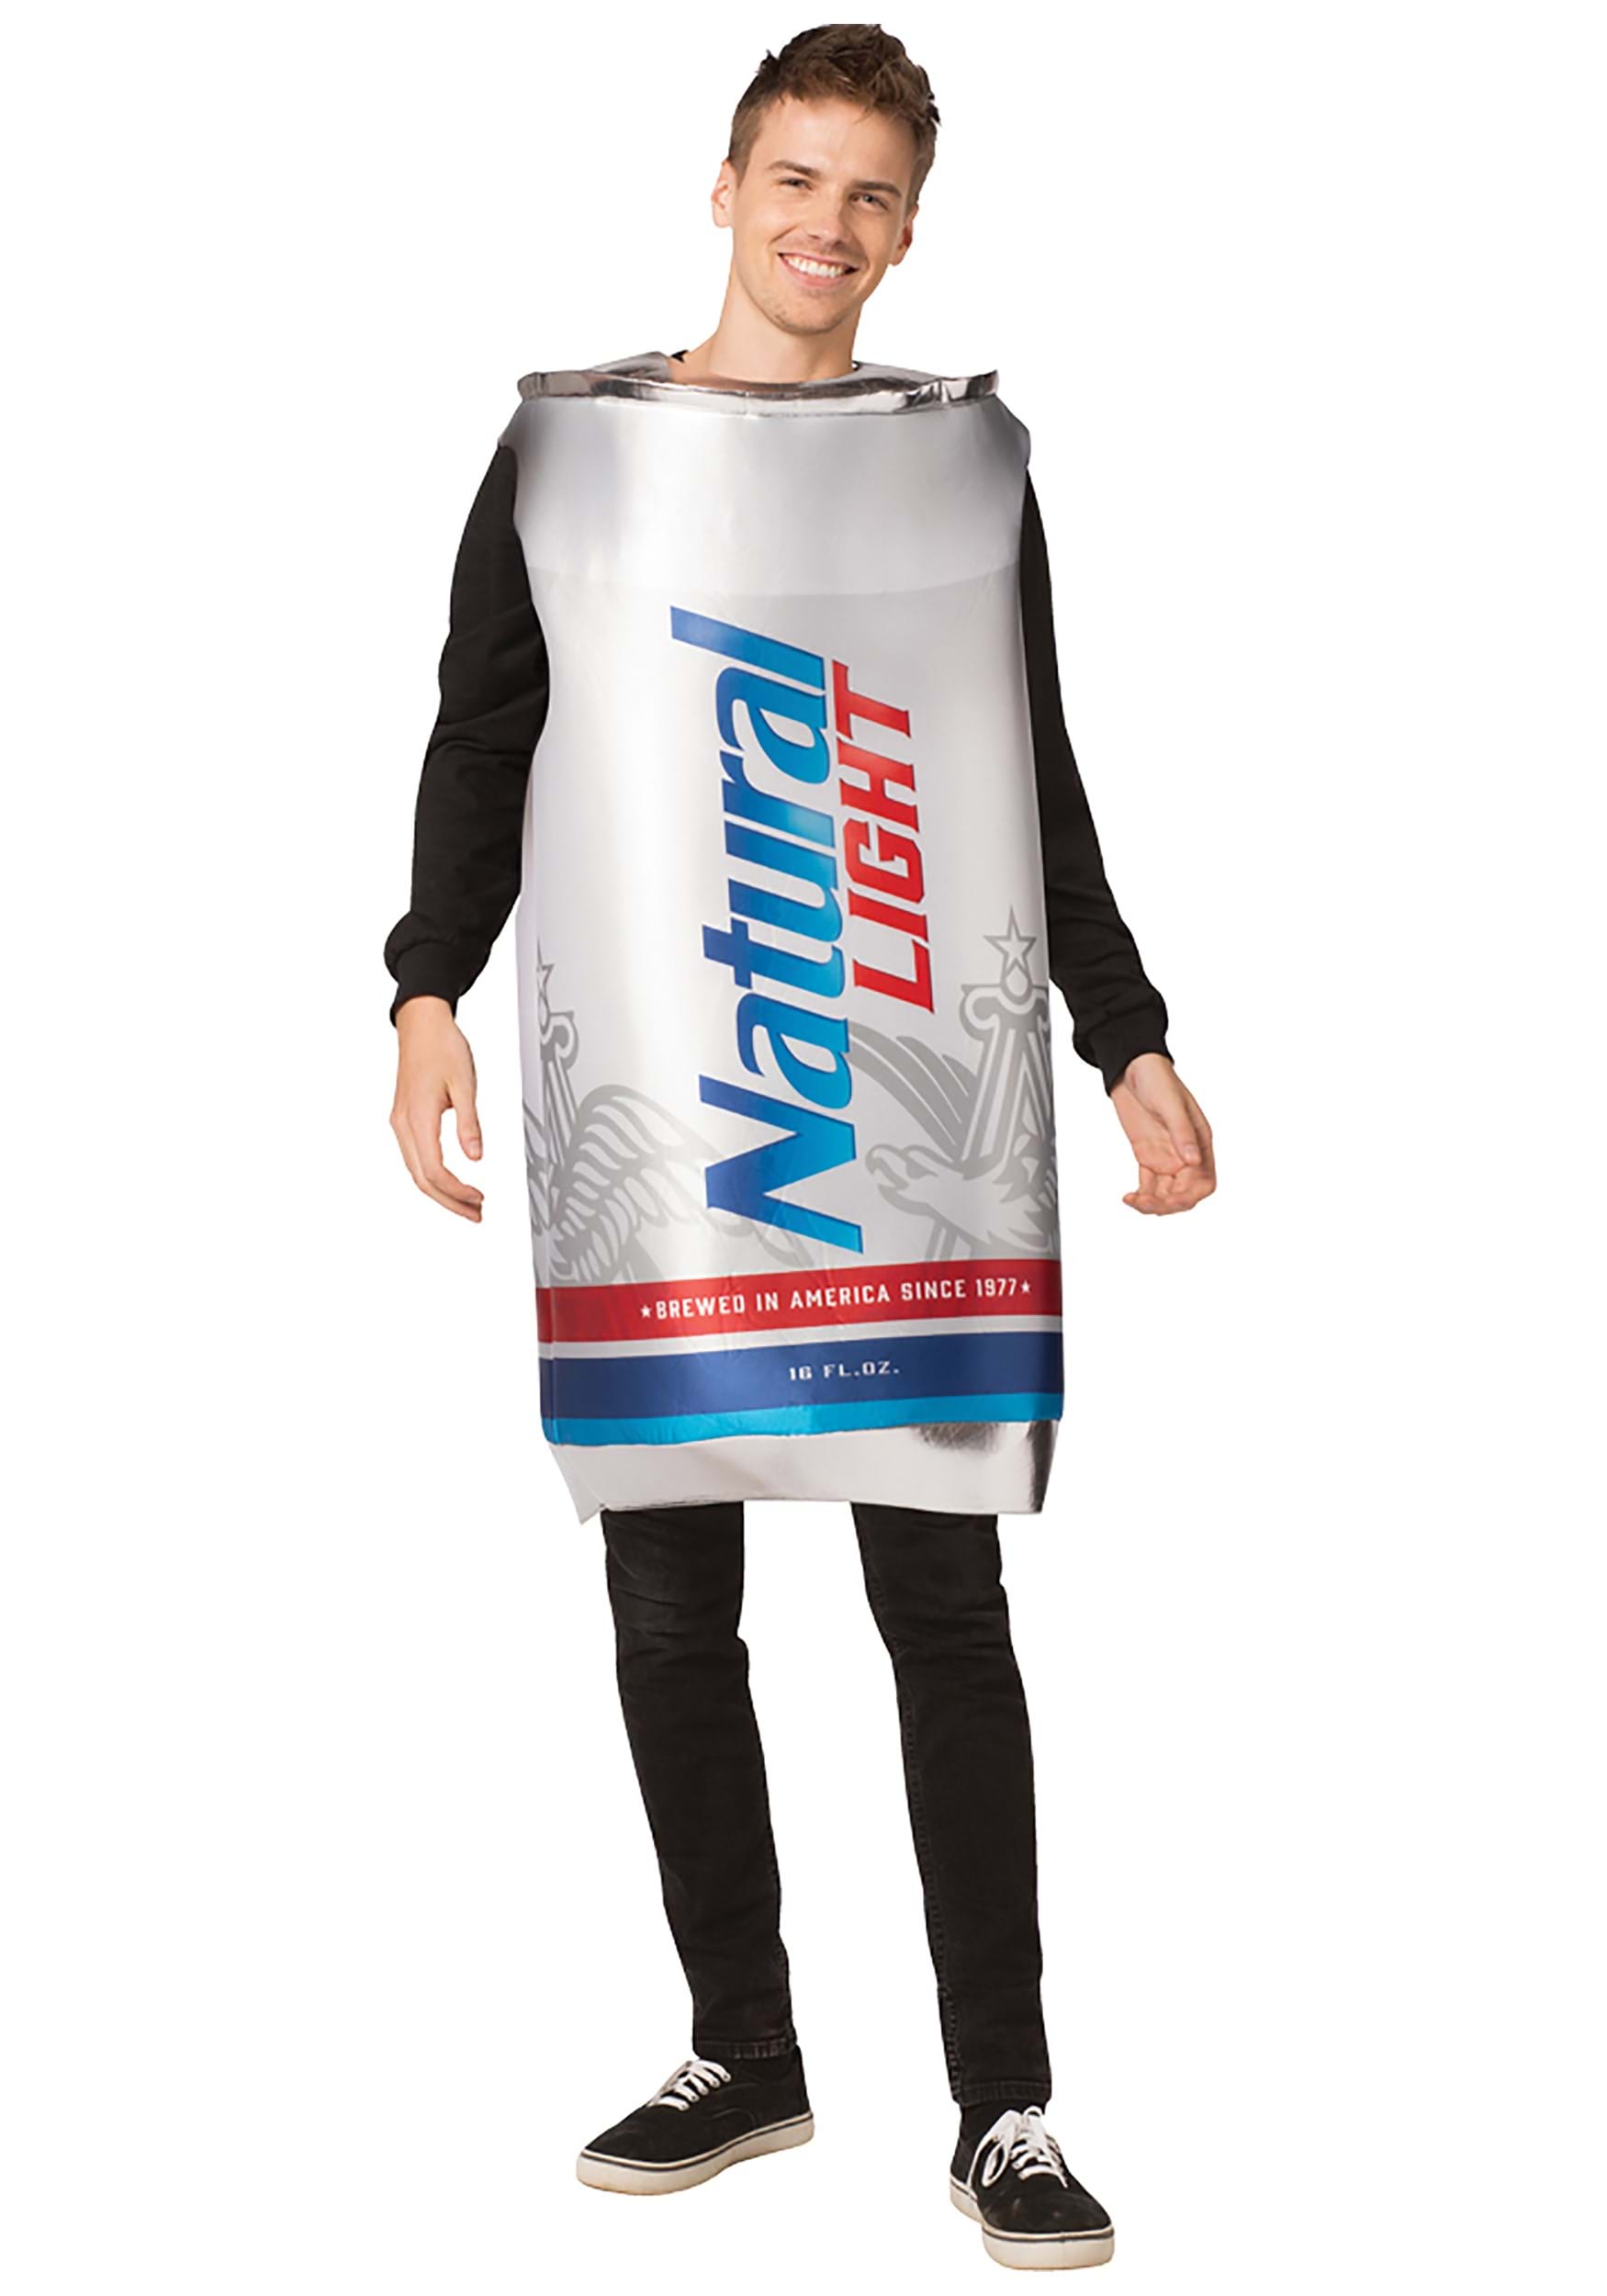 Adult Natural Light Can Costume